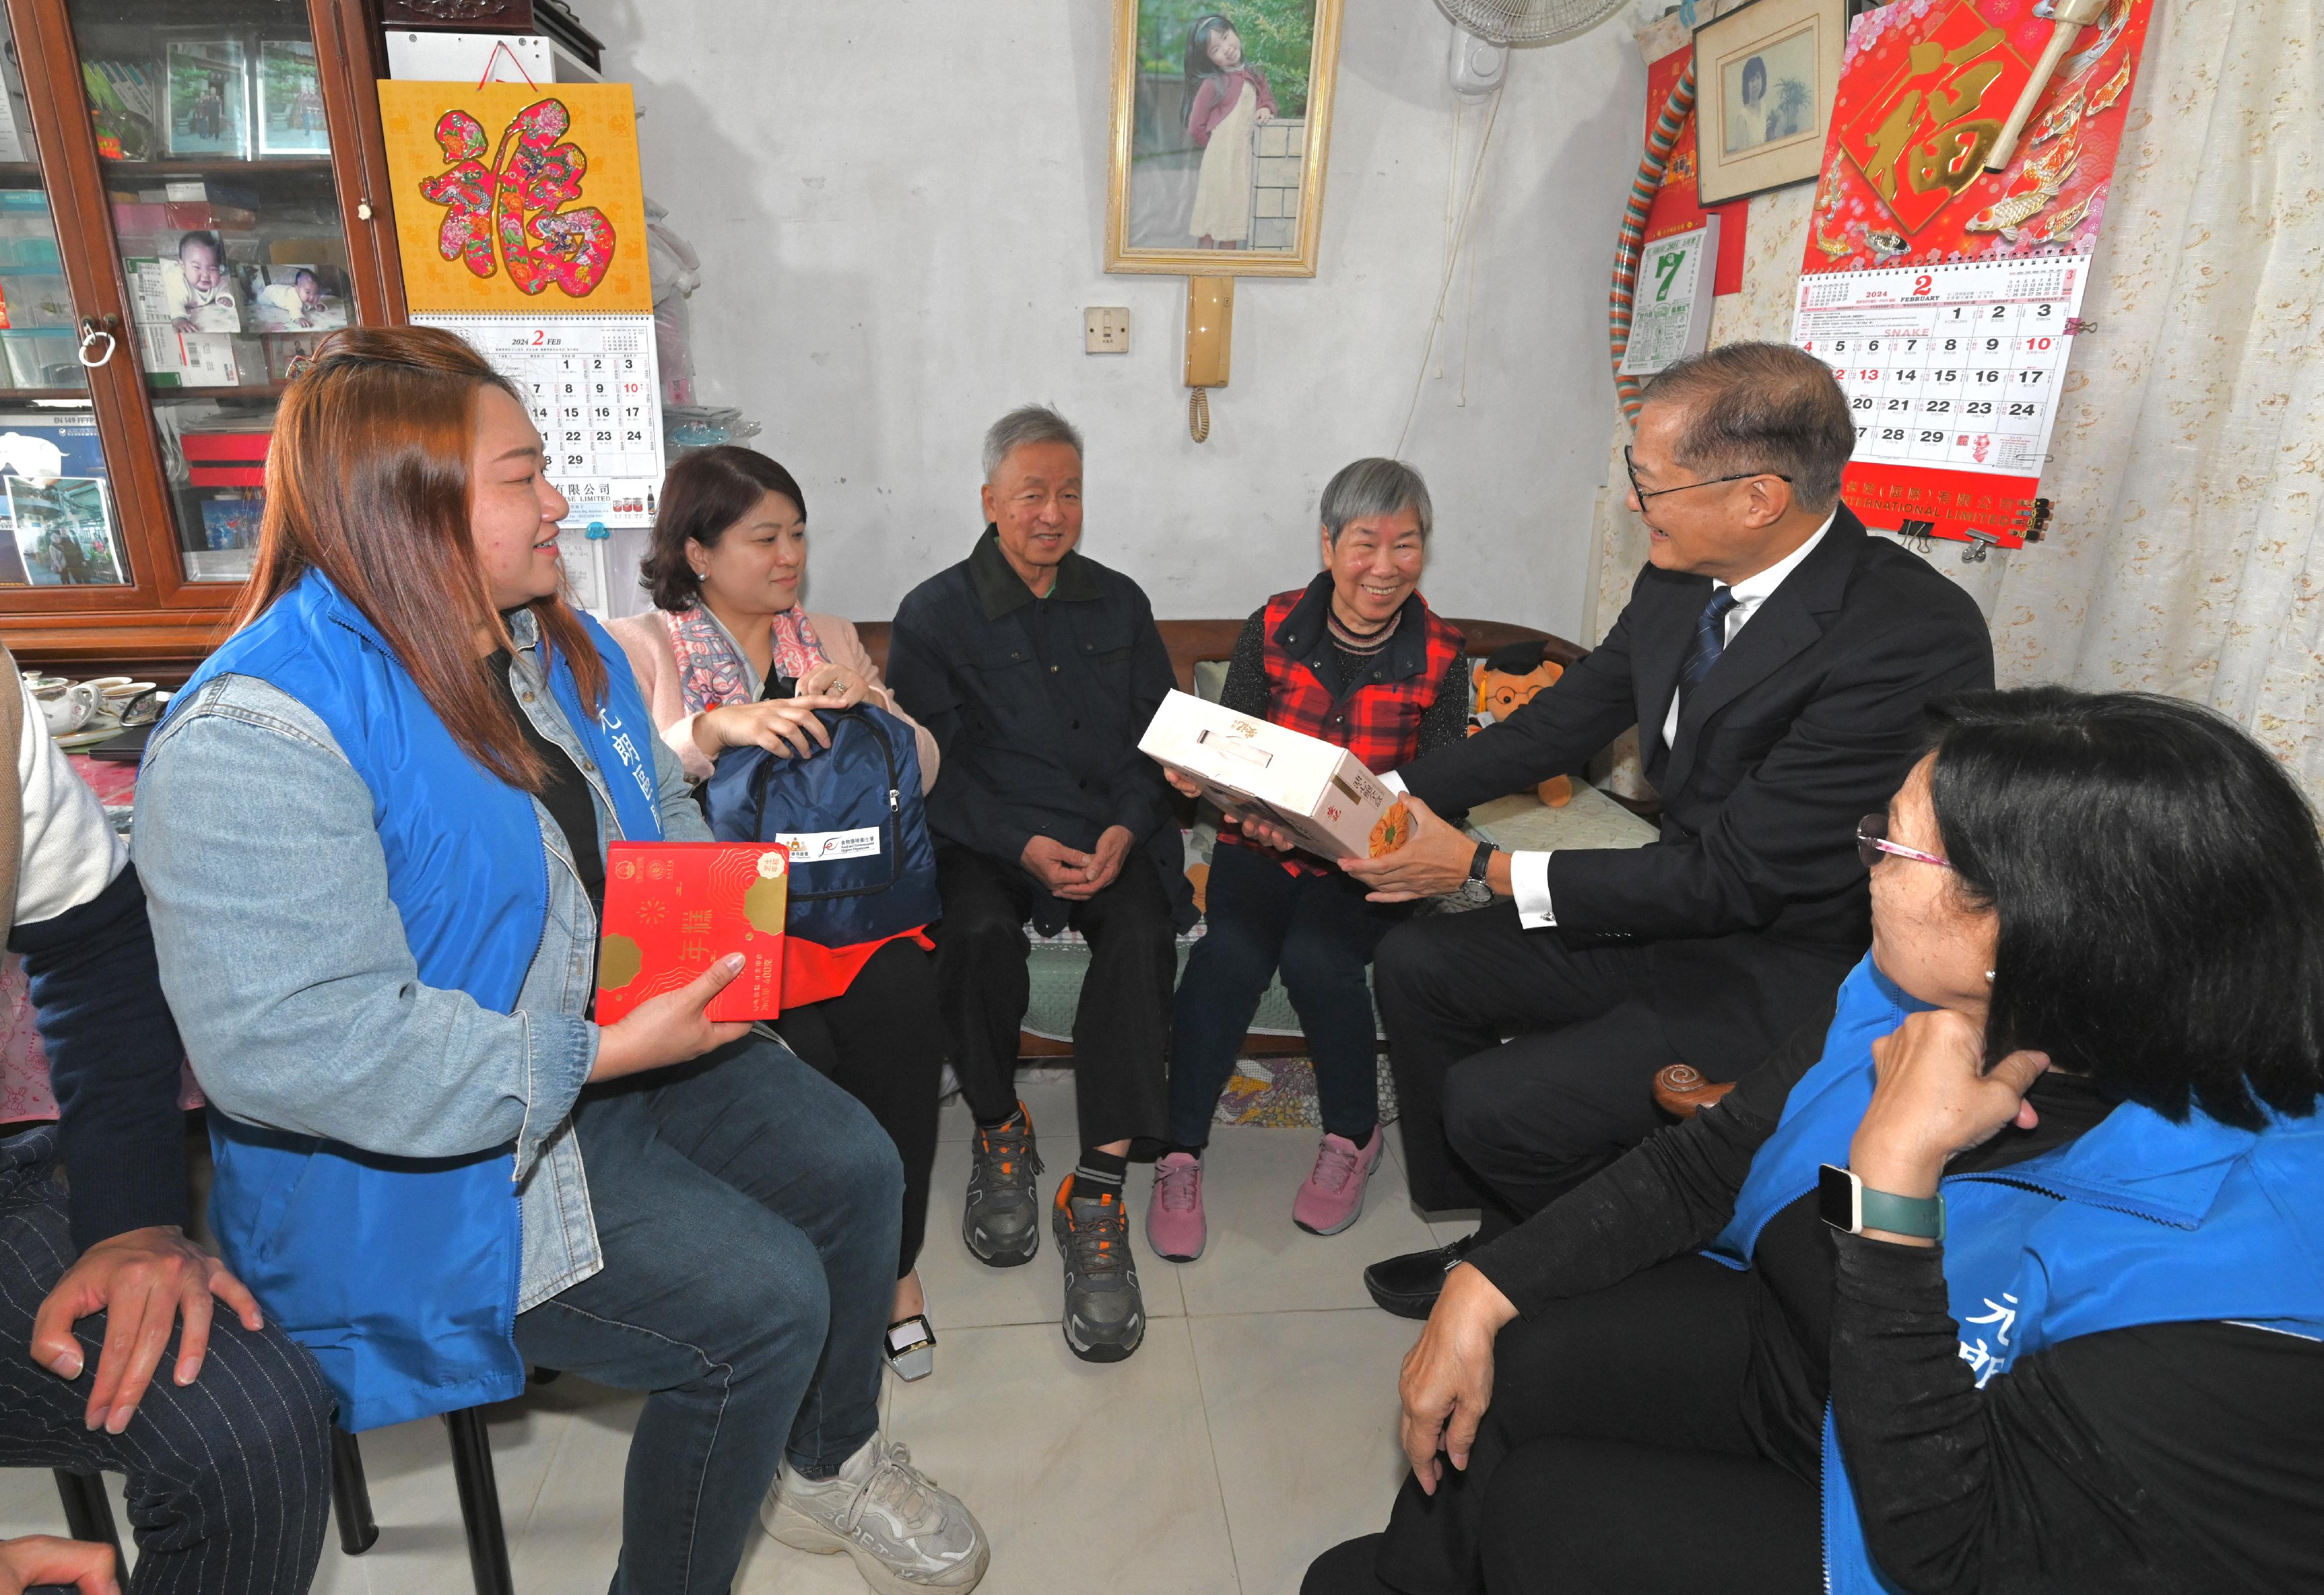 The Secretary for Health, Professor Lo Chung-mau (second right), and the Under Secretary for Health, Dr Libby Lee (second left), together with Yuen Long District Council members and representatives from the Care Team (Yuen Long) visit a grassroots family living in Tin Wah Estate in Tin Shui Wai today (February 7) to present gifts and extend seasonal greetings to them on behalf of the Government.